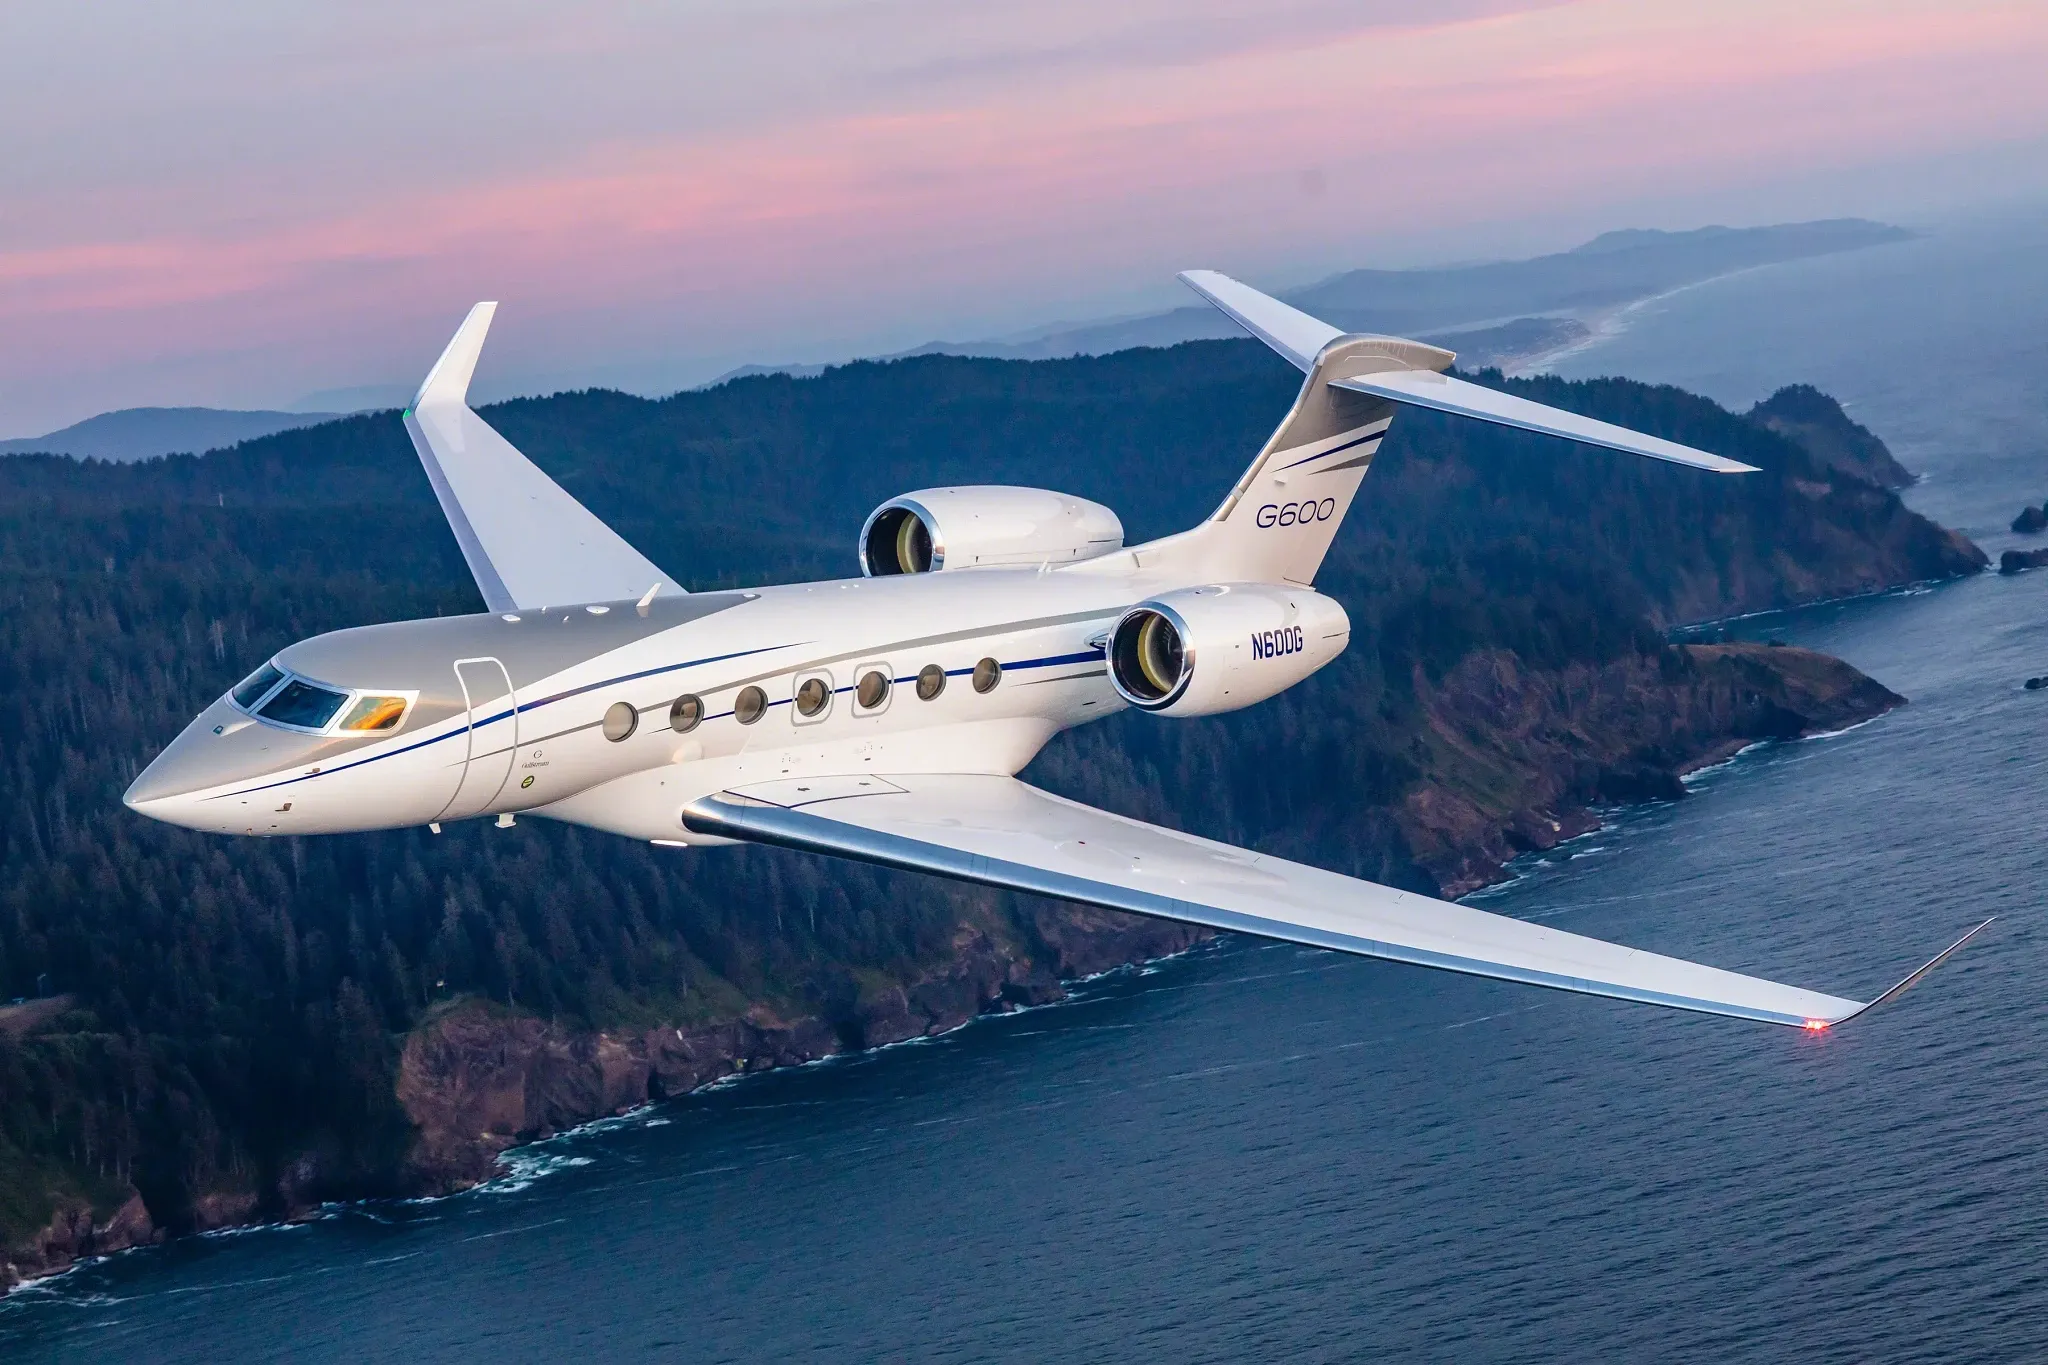 A Gulfstream G600 seen flying over the coast.